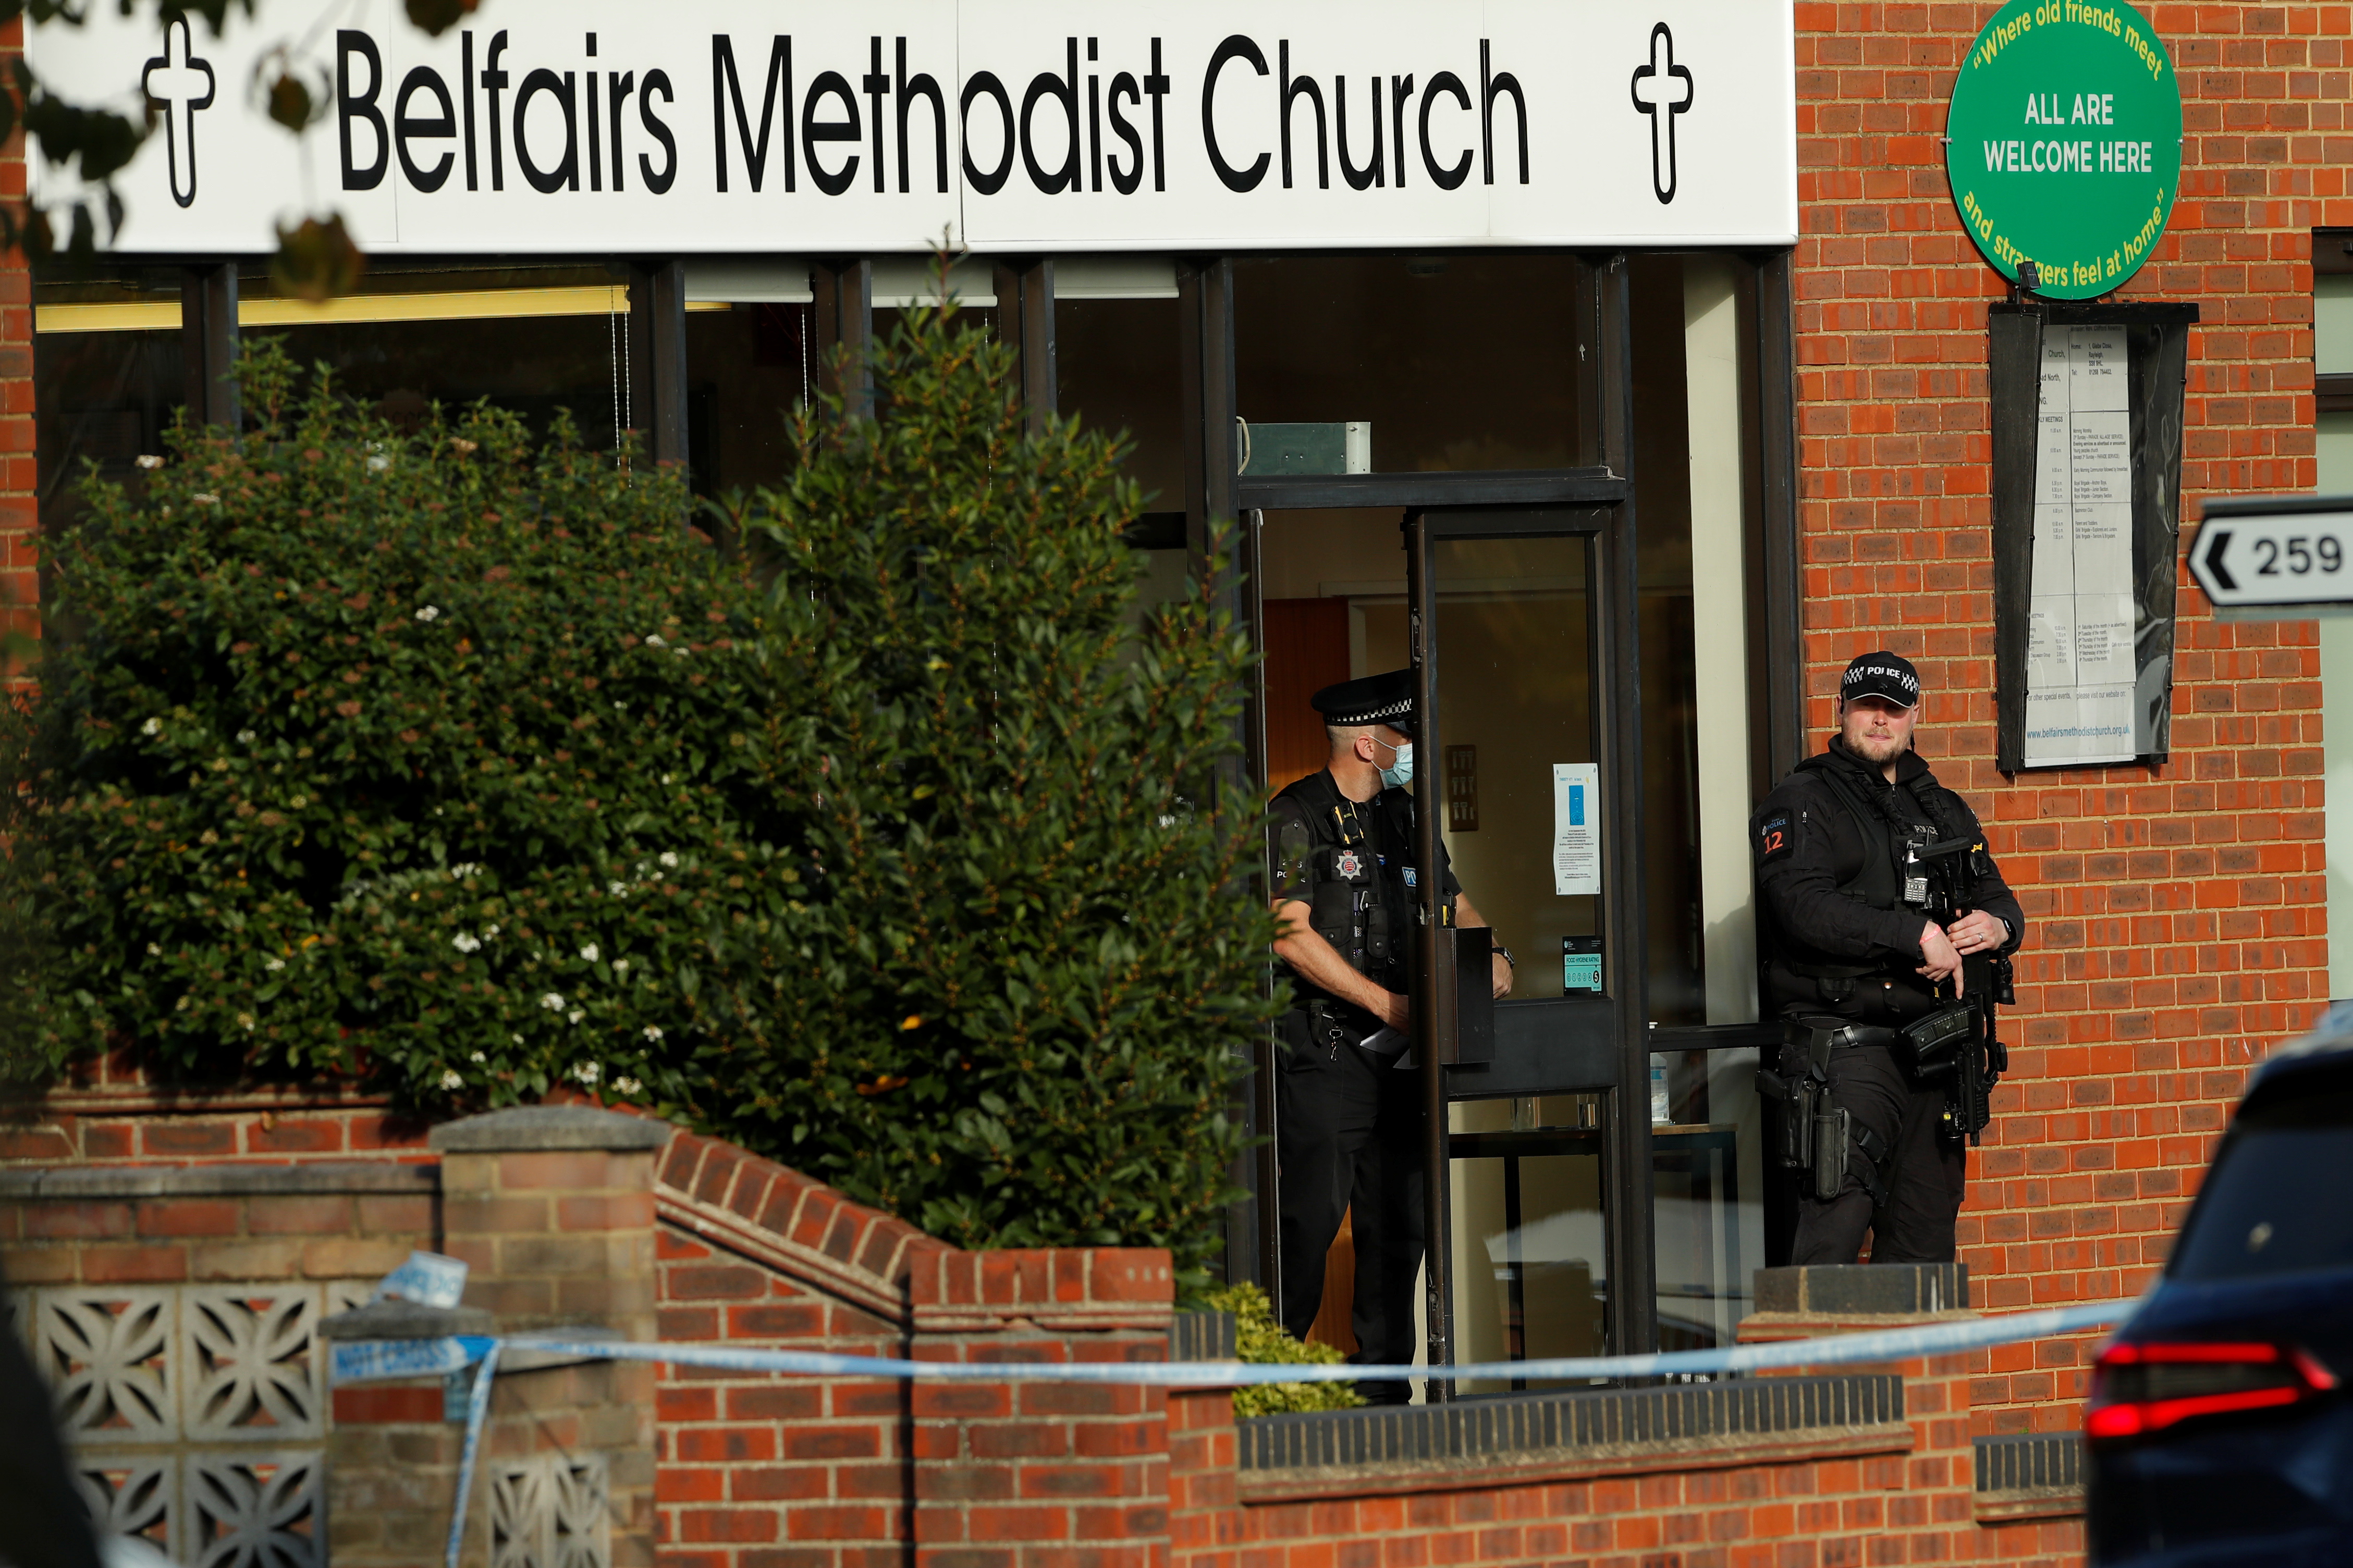 Police officers are seen at the scene where MP David Amess was stabbed during constituency surgery, in Leigh-on-Sea, Britain October 15, 2021. REUTERS/Andrew Couldridge